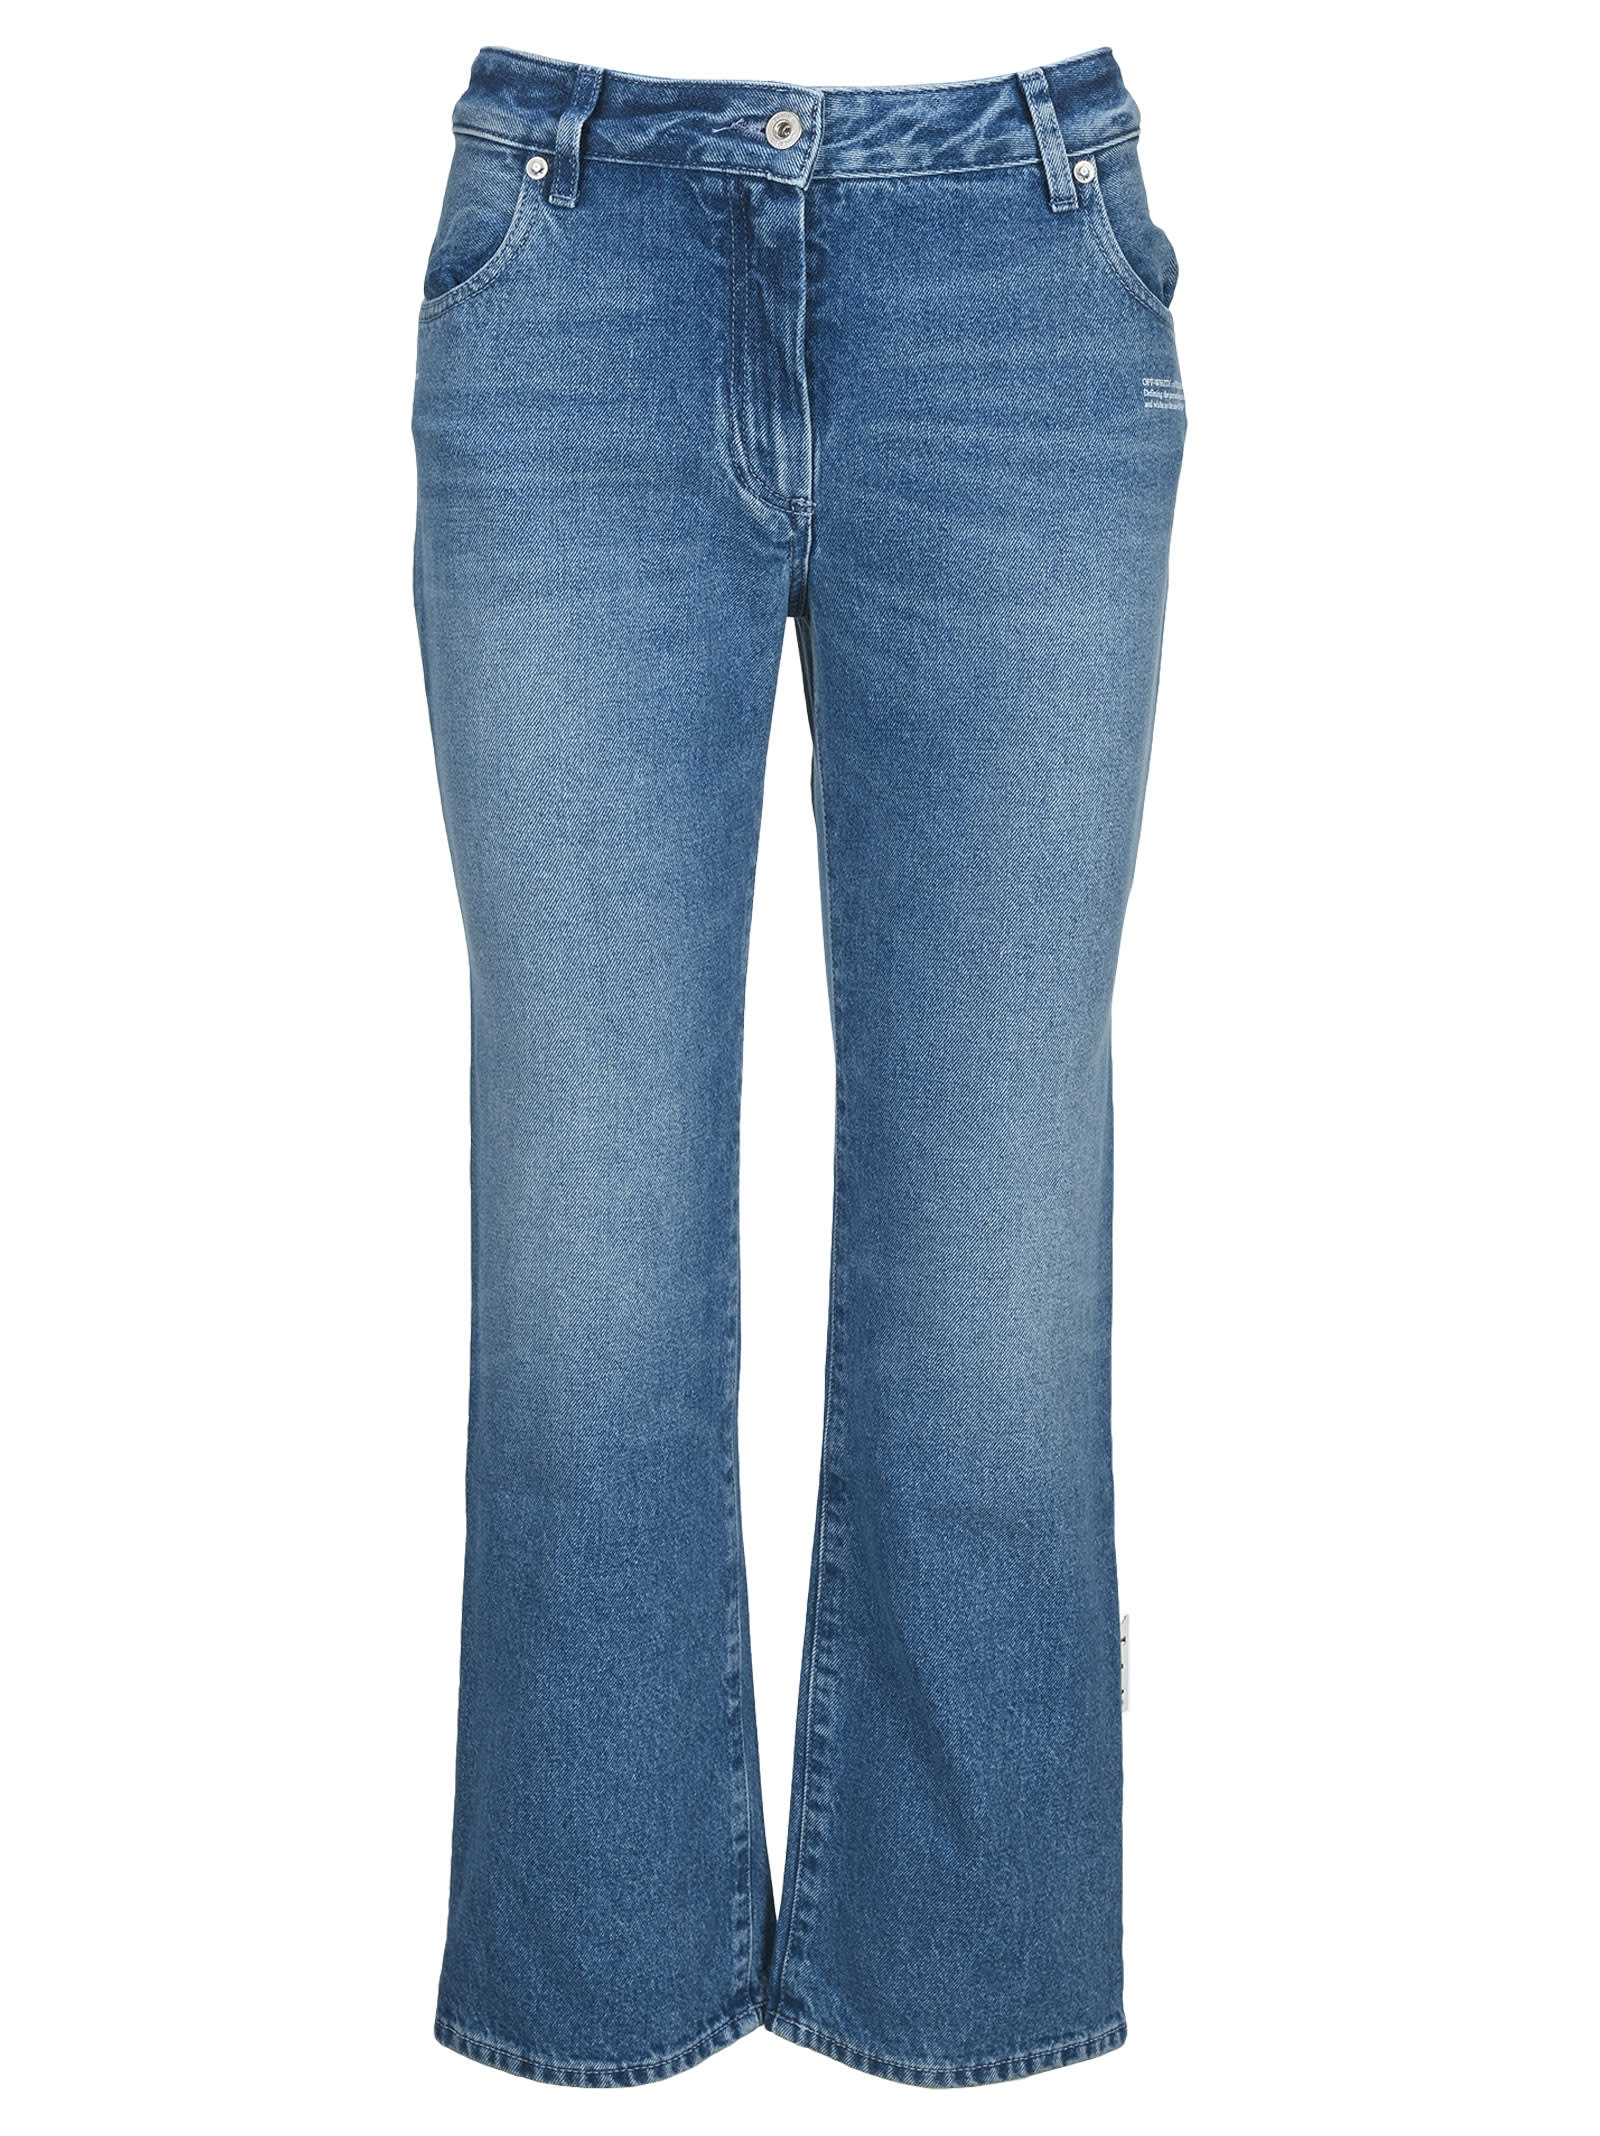 Shop Now For The Off-White Flared Cropped Denim Jeans | AccuWeather Shop